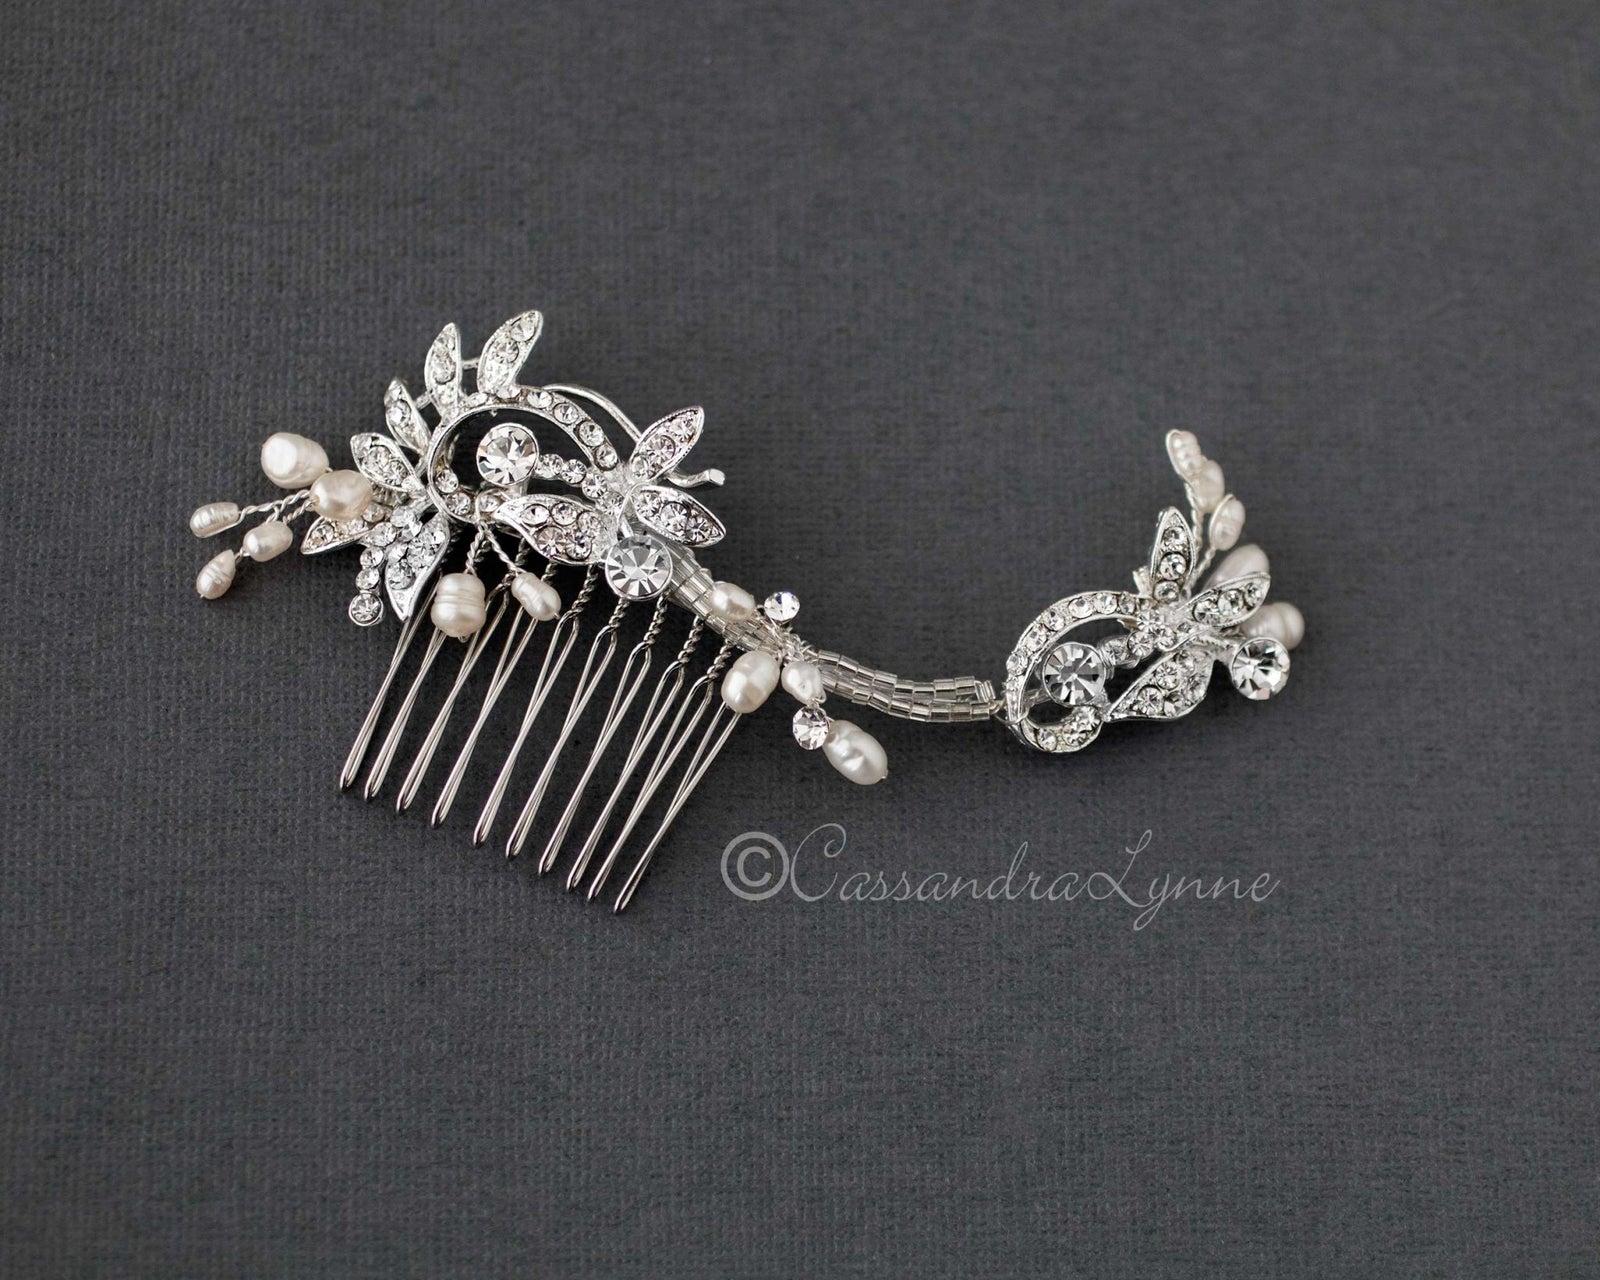 Crystal and Freshwater Pearl Wave Bridal Comb - Cassandra Lynne